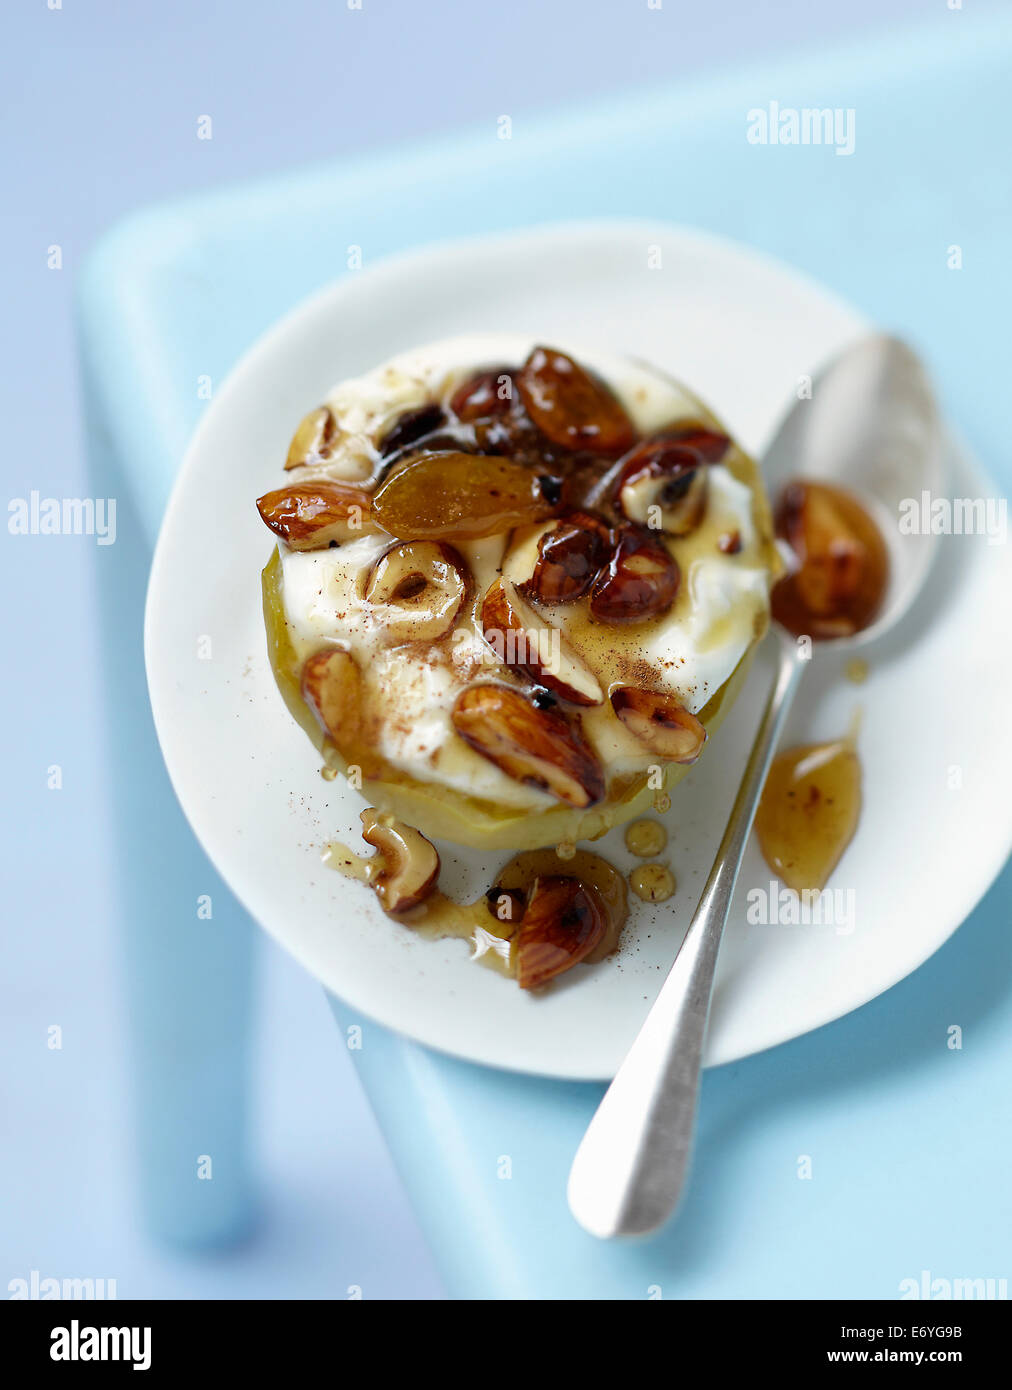 Granny Smith apple stuffed with dried fruit and honey Stock Photo